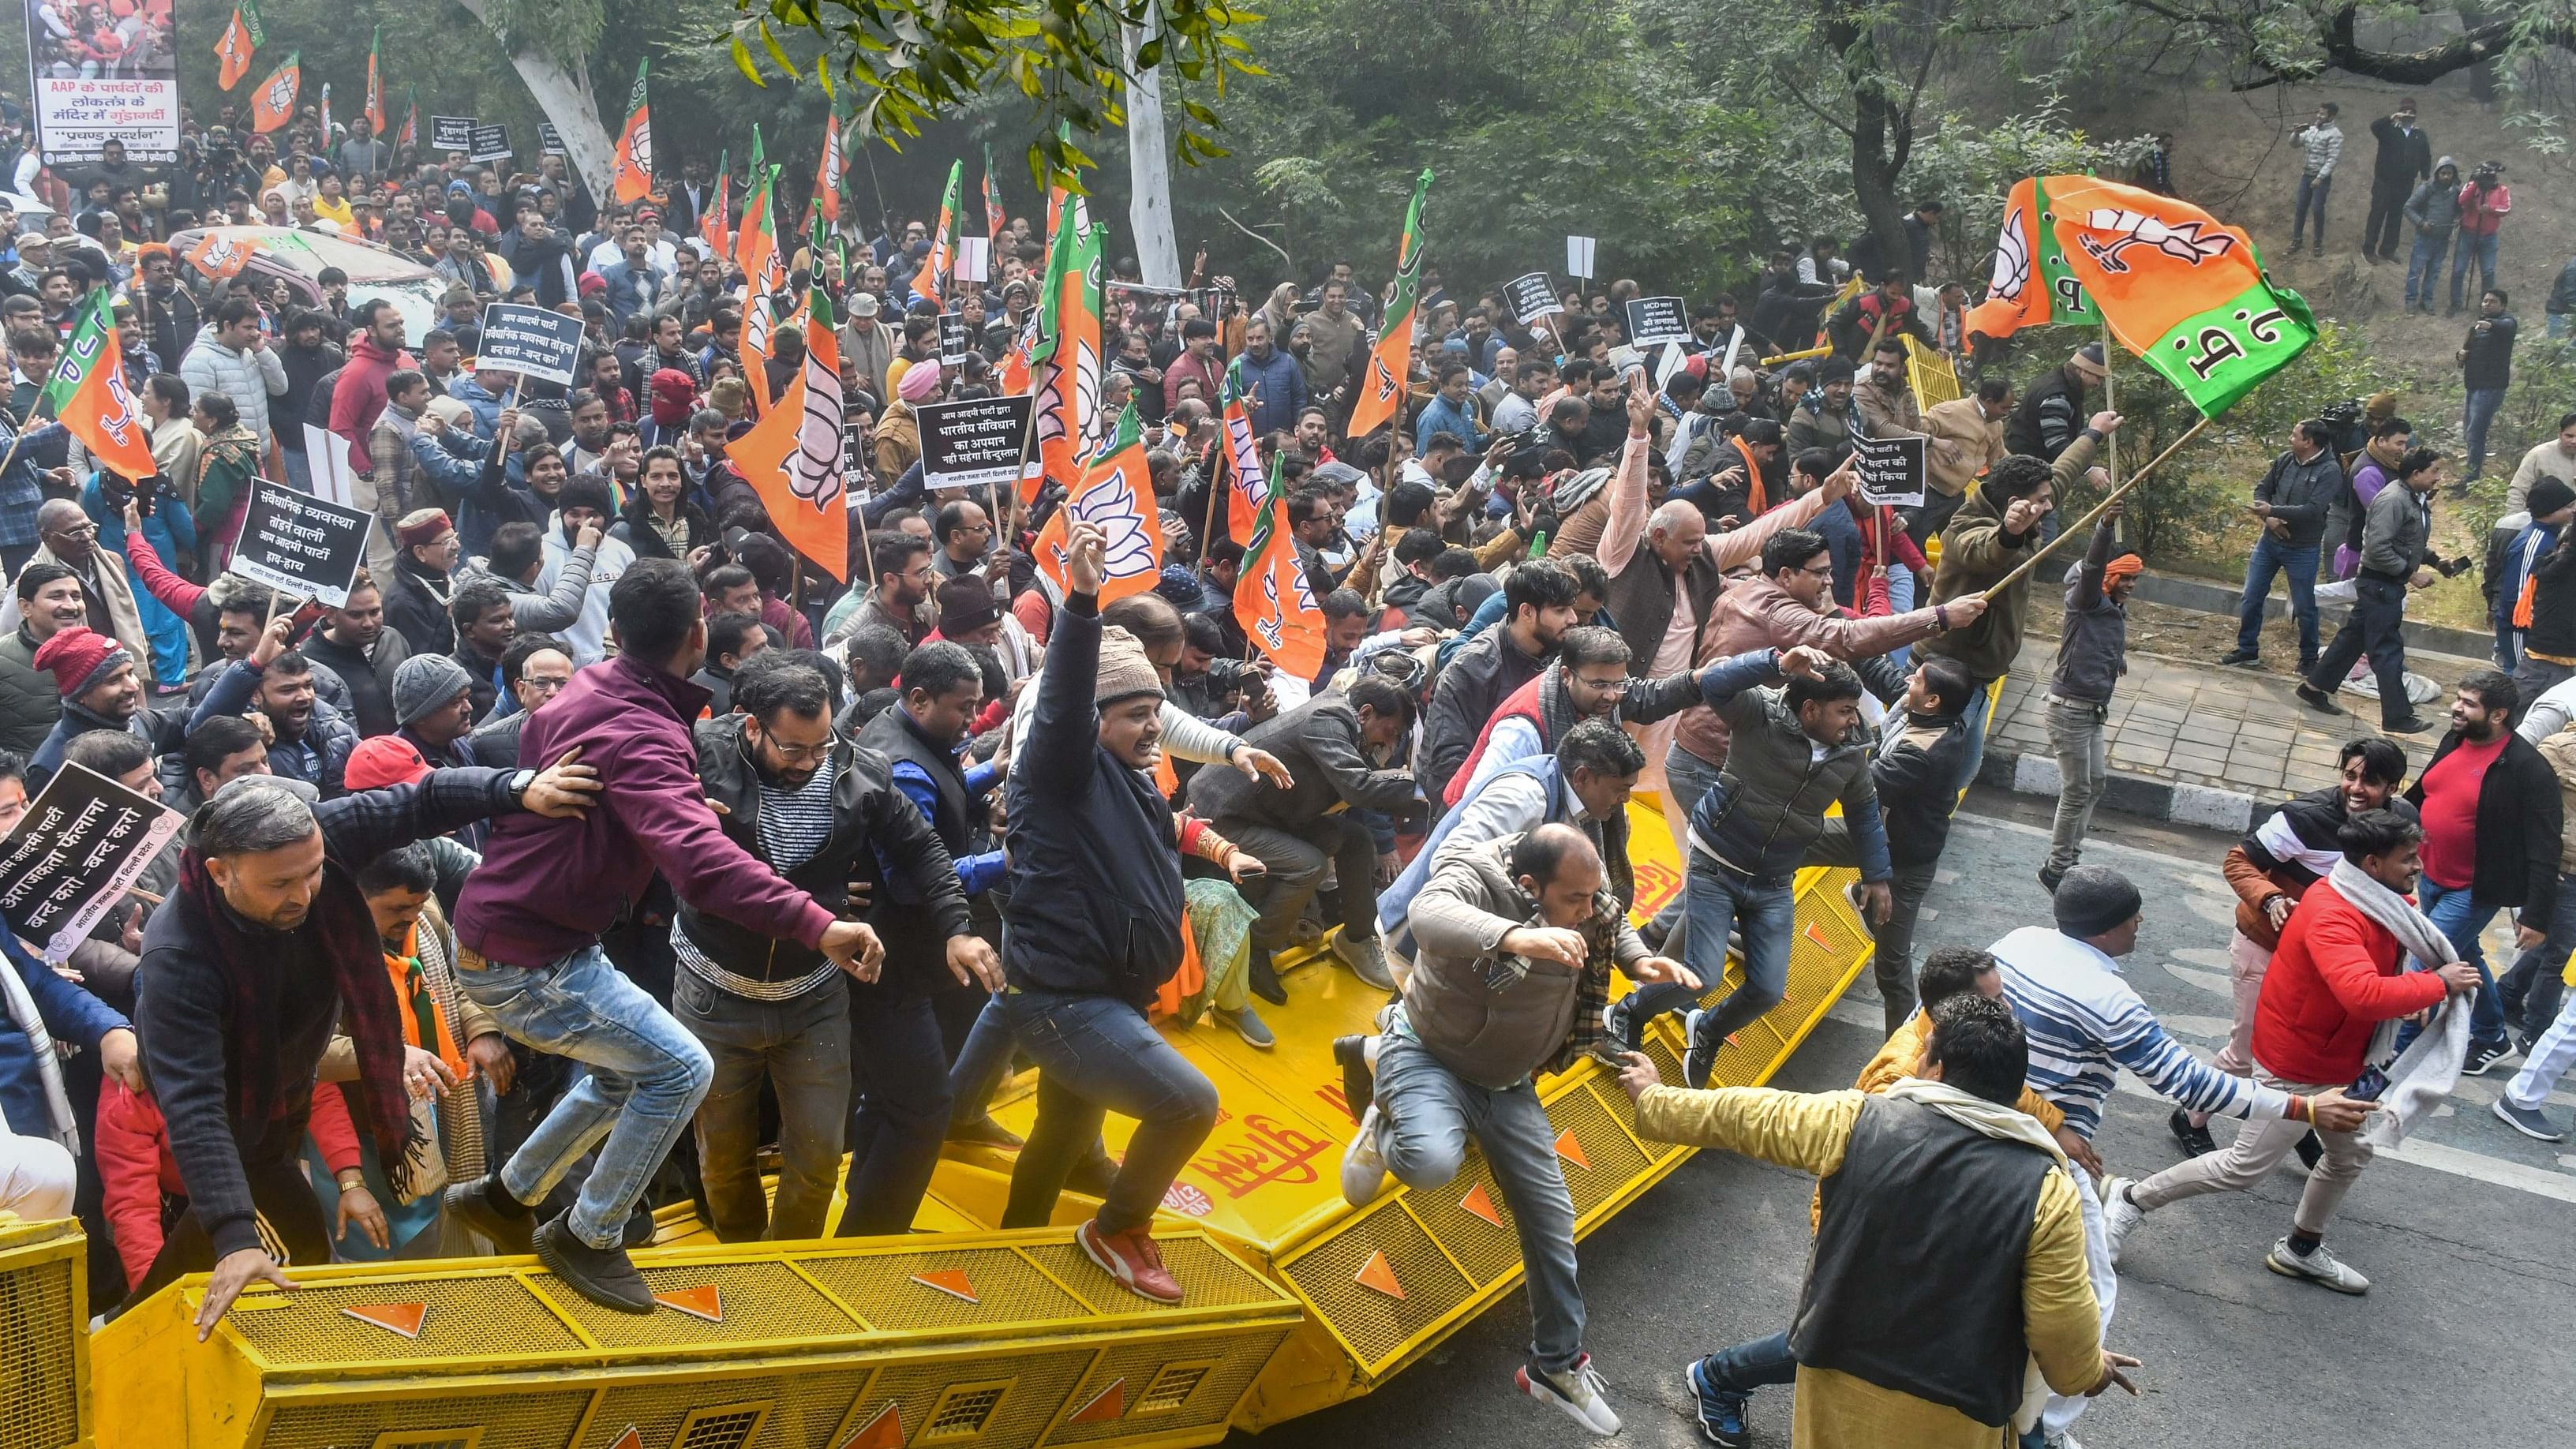 BJP activists break the police barricade during a protest against AAP regarding clashes during MCD Mayor's election, near the residence of Delhi Chief Minister Arvind Kejriwal, in New Delhi, Monday, Jan. 9, 2023. Credit: PTI Photo